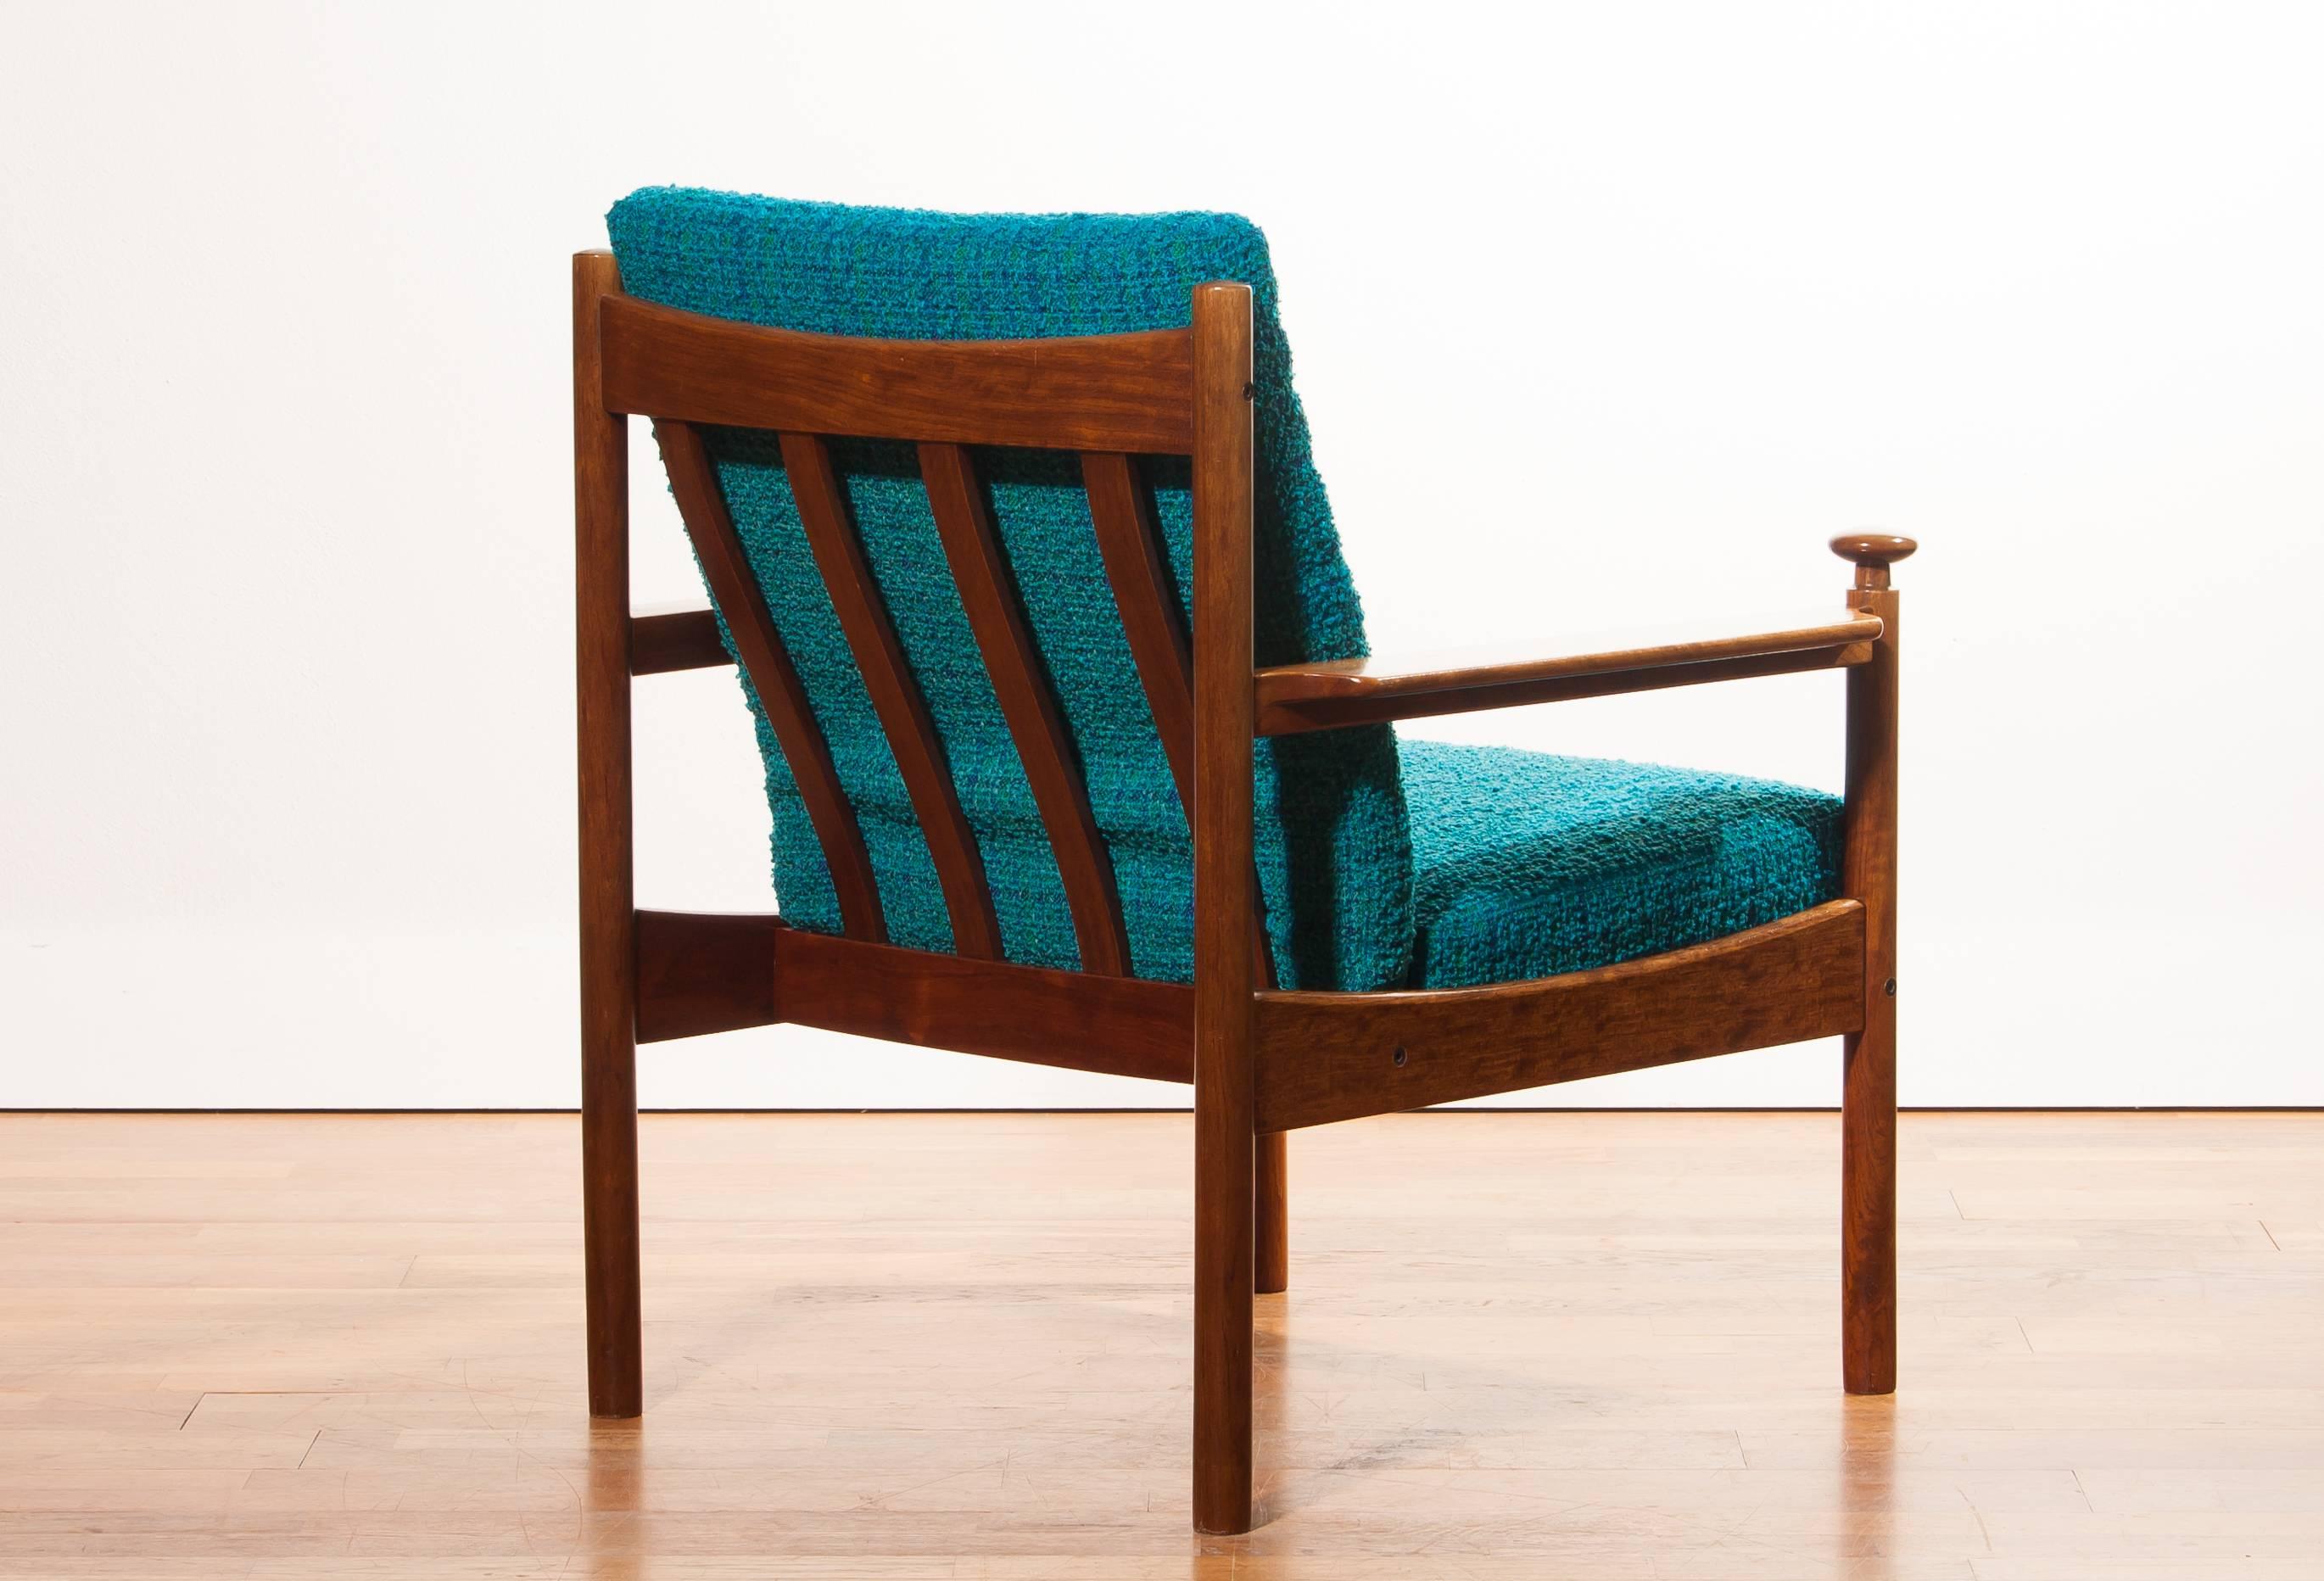 Beautiful chair designed by Torbjørn Afdal for Sandvik & Co Mobler Norway.
The wooden frame with the blue fabric cushions makes it a very nice combination.
Period 1950s
Dimensions: H 83 cm, W 70 cm, D 71 cm, Sh 40 cm.